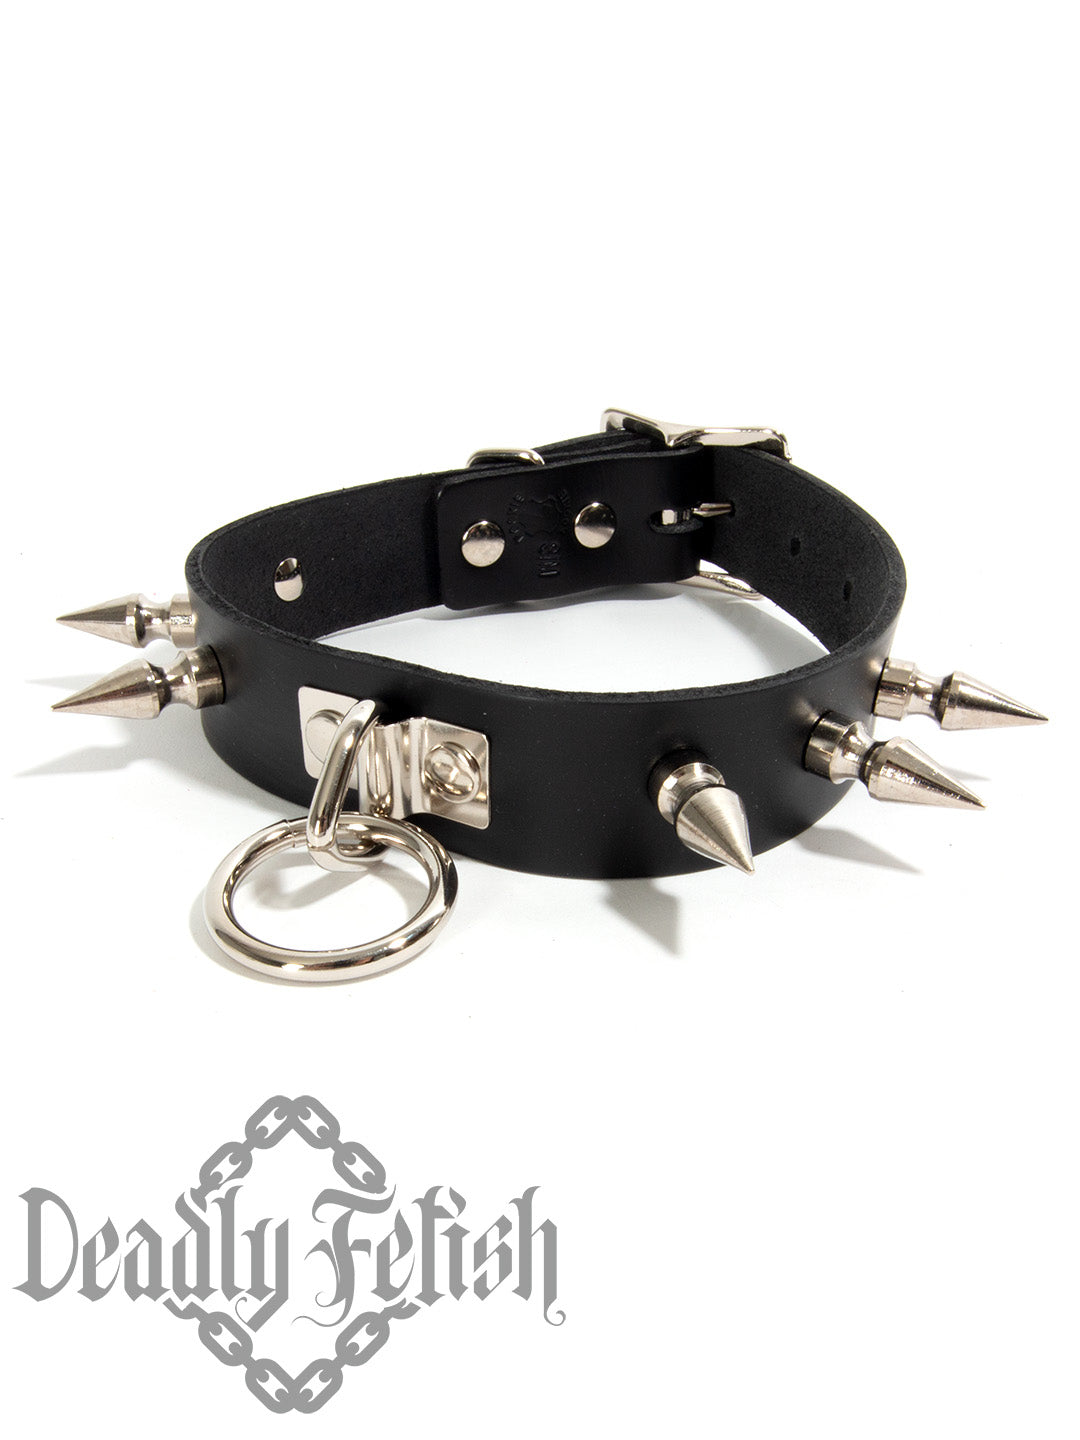 Deadly Fetish Leather: Collar #06